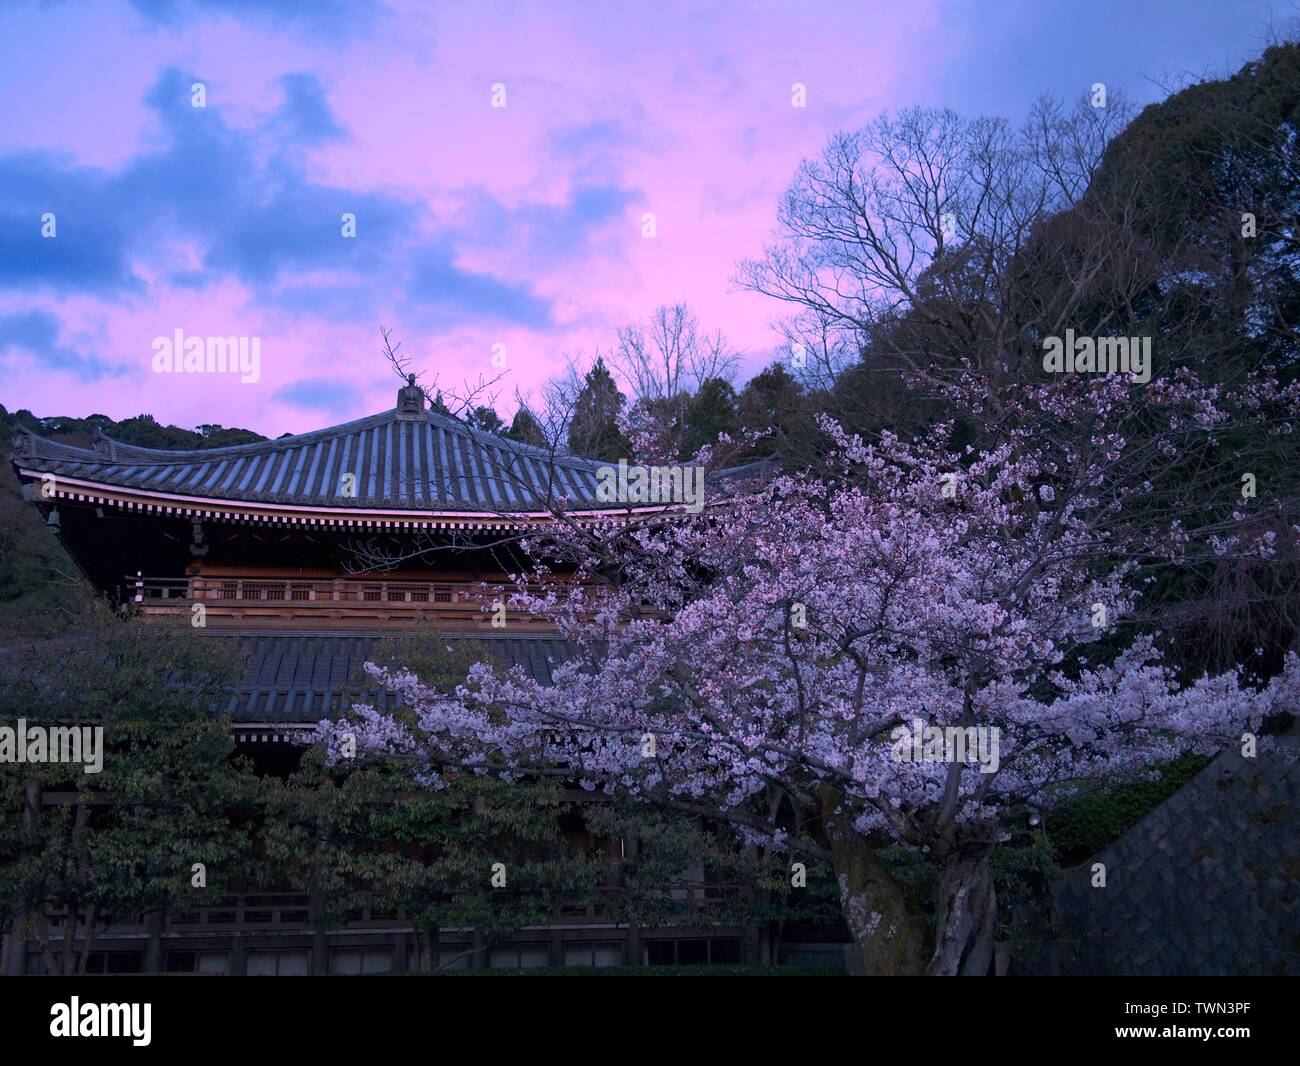 Chion-in or Chionin Temple grounds at dusk or sunset with a cherry blossom tree or sakura and pink sky, Kyoto, Japan Stock Photo